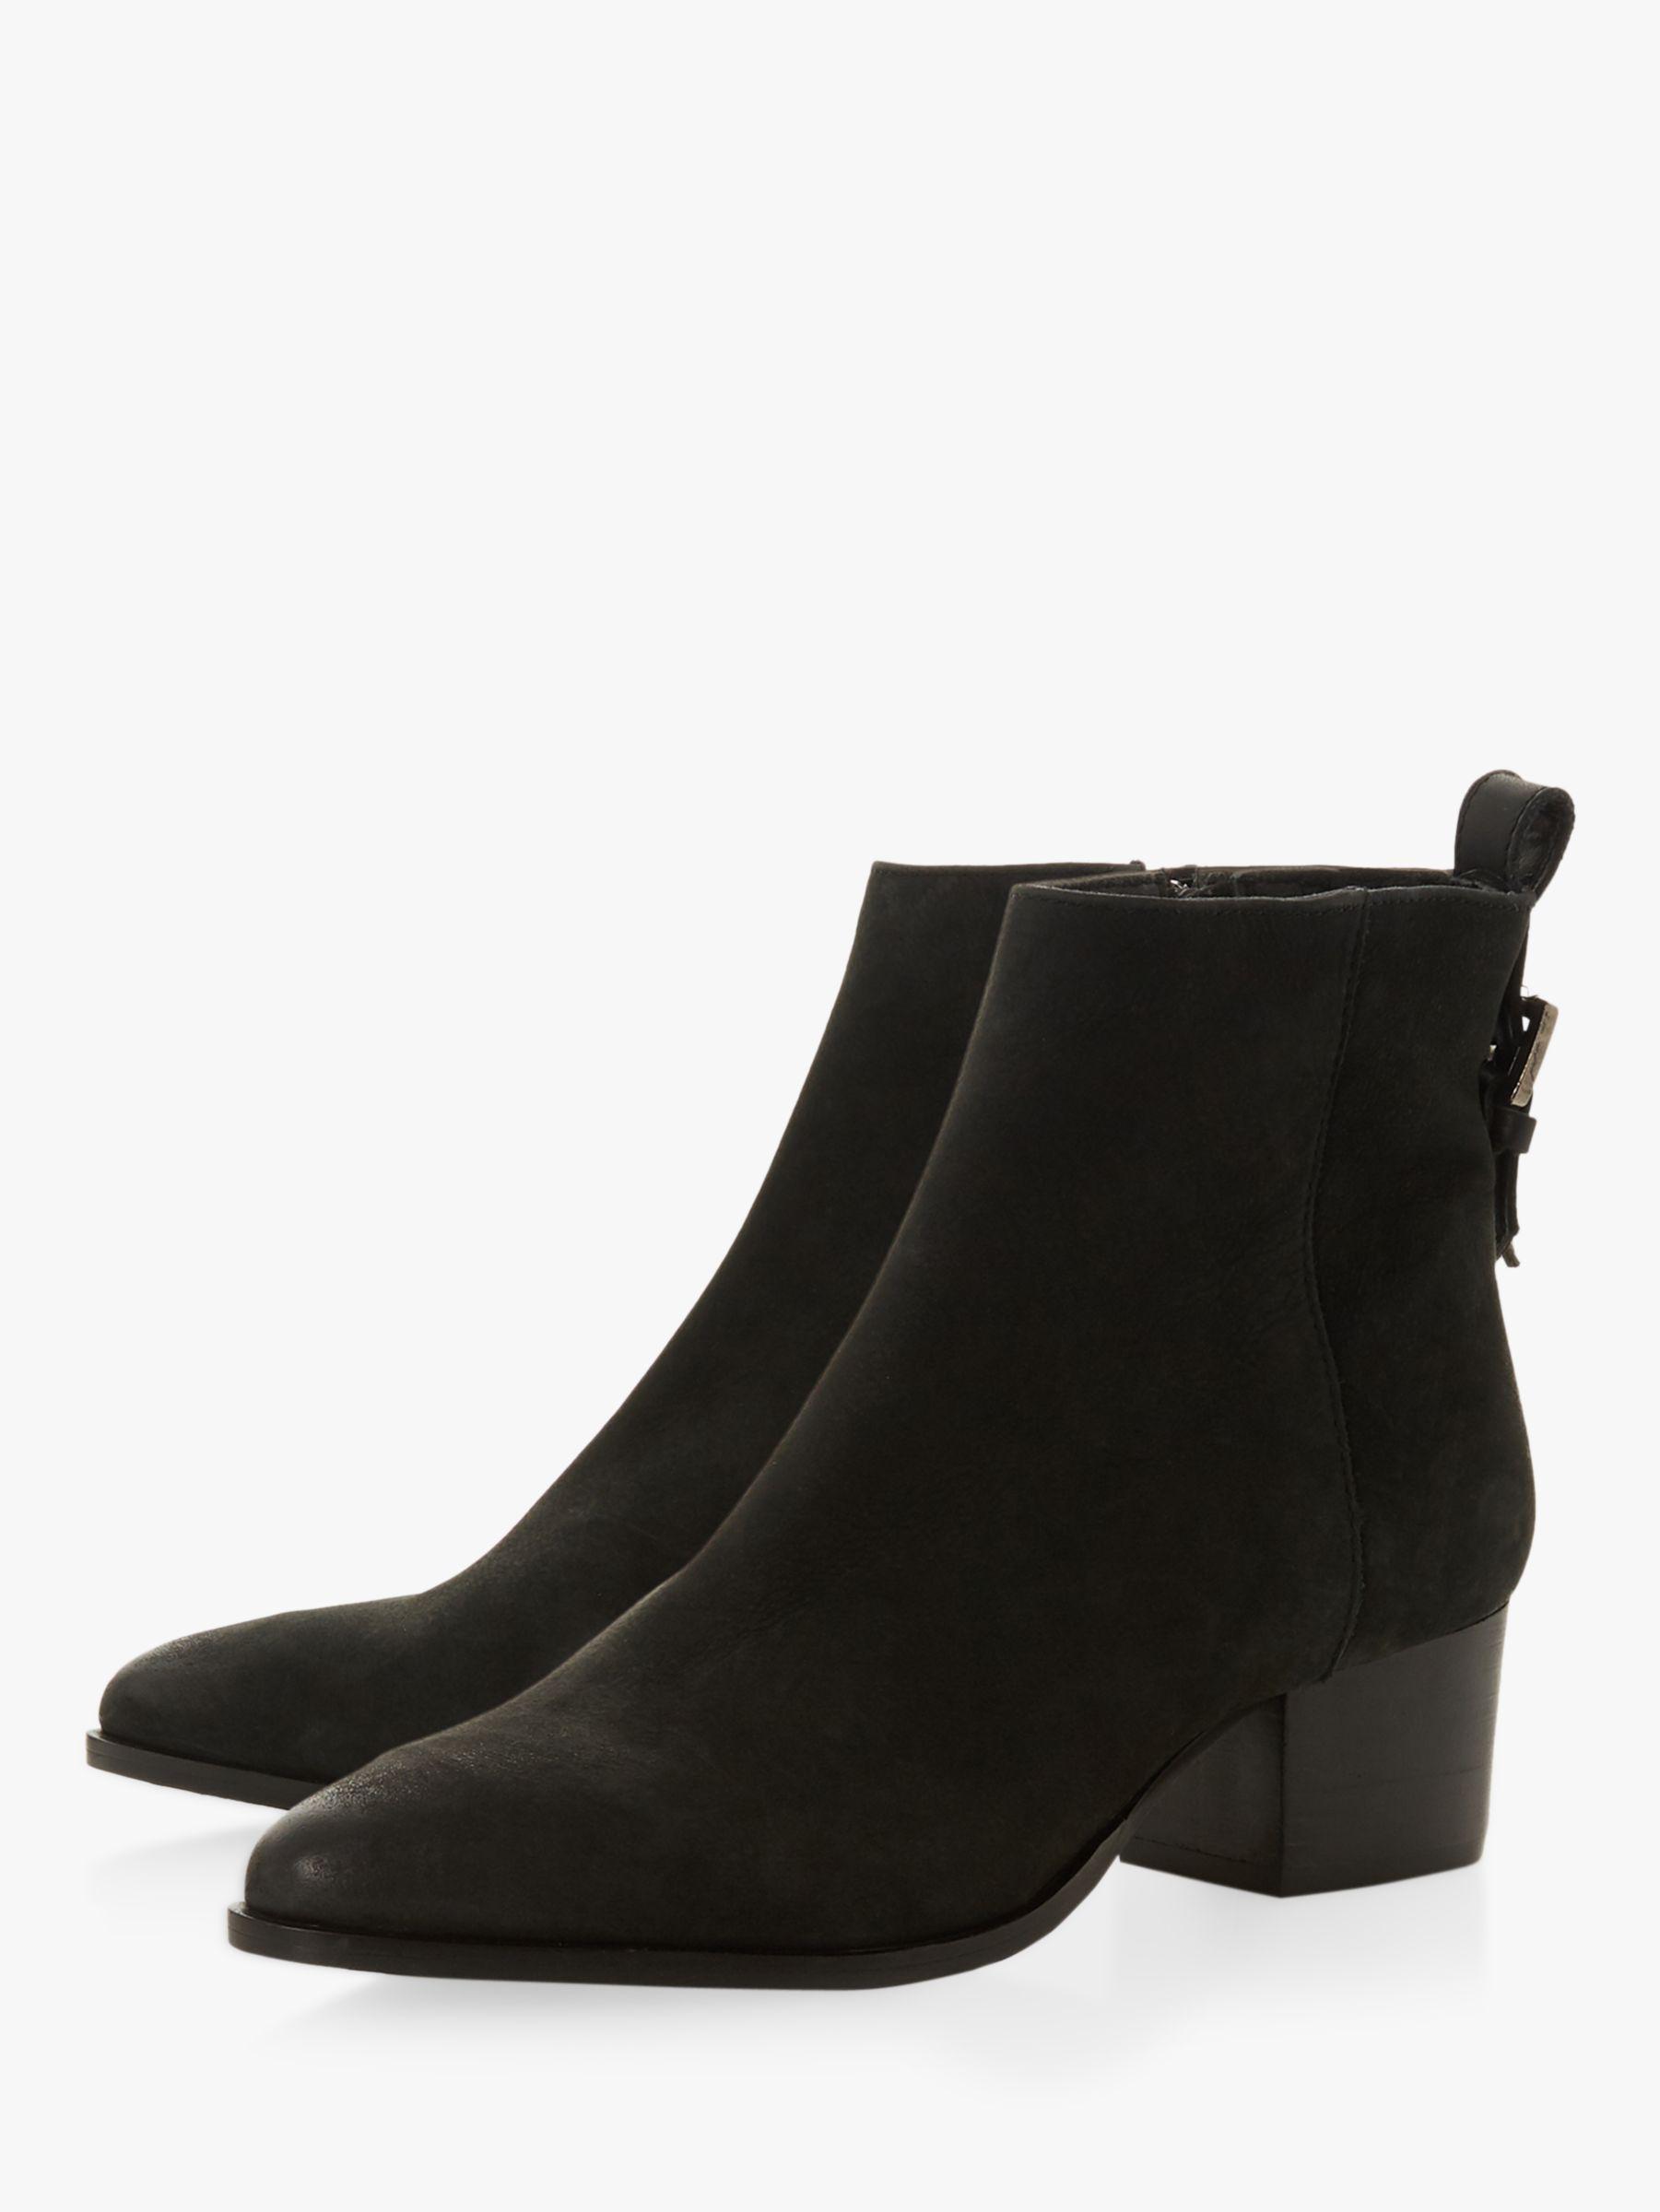 Dune Proudly Nubuck Leather Ankle Boots 